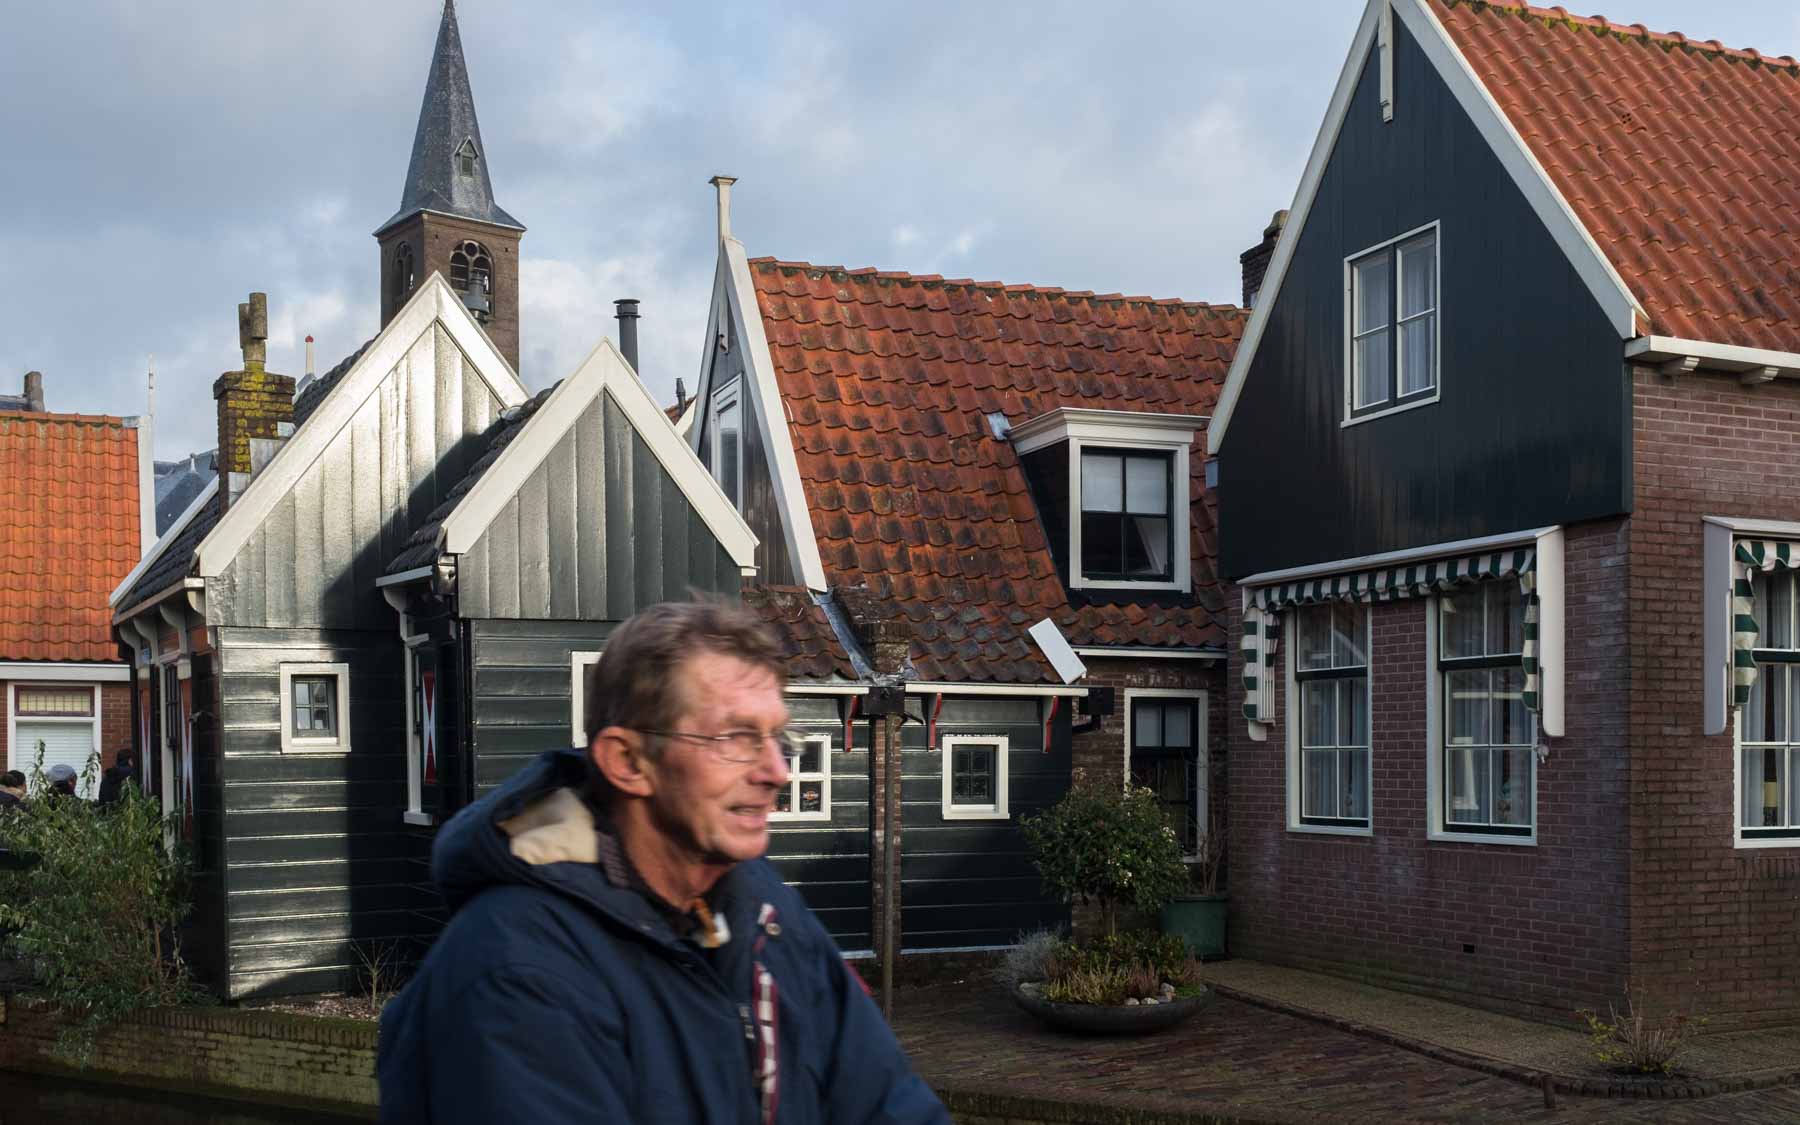 Homes just off the main street of Volendam.